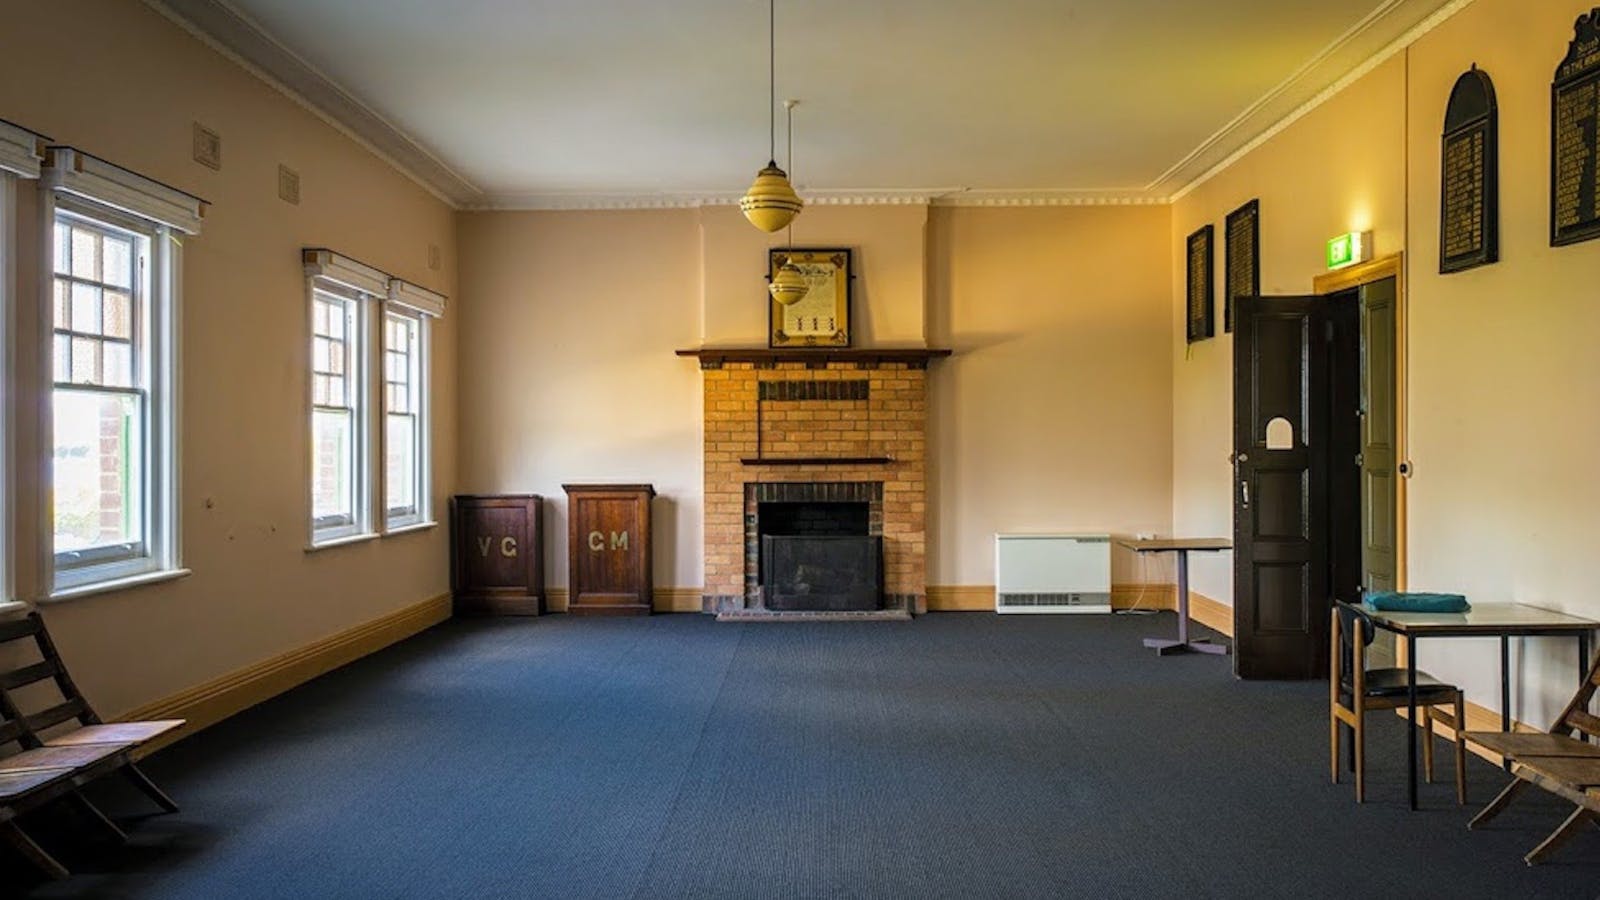 The Upstairs Supper Room has seating for up to 50, standing room for 70 and views of the Huon River